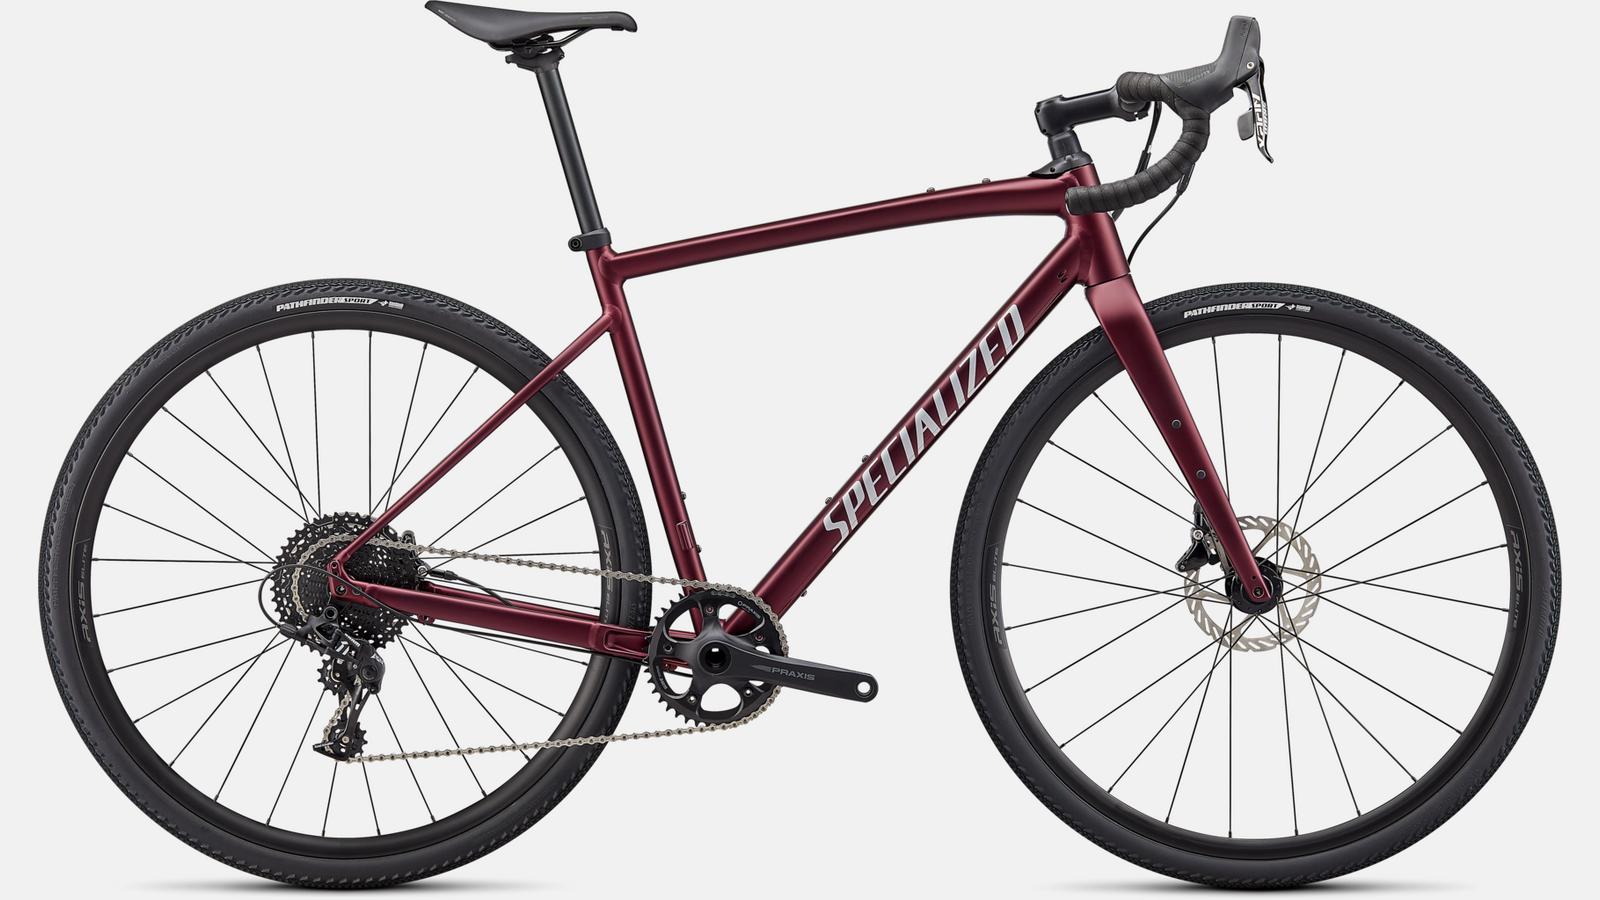 Paint for 2022 Specialized Diverge Comp E5 - Satin Maroon